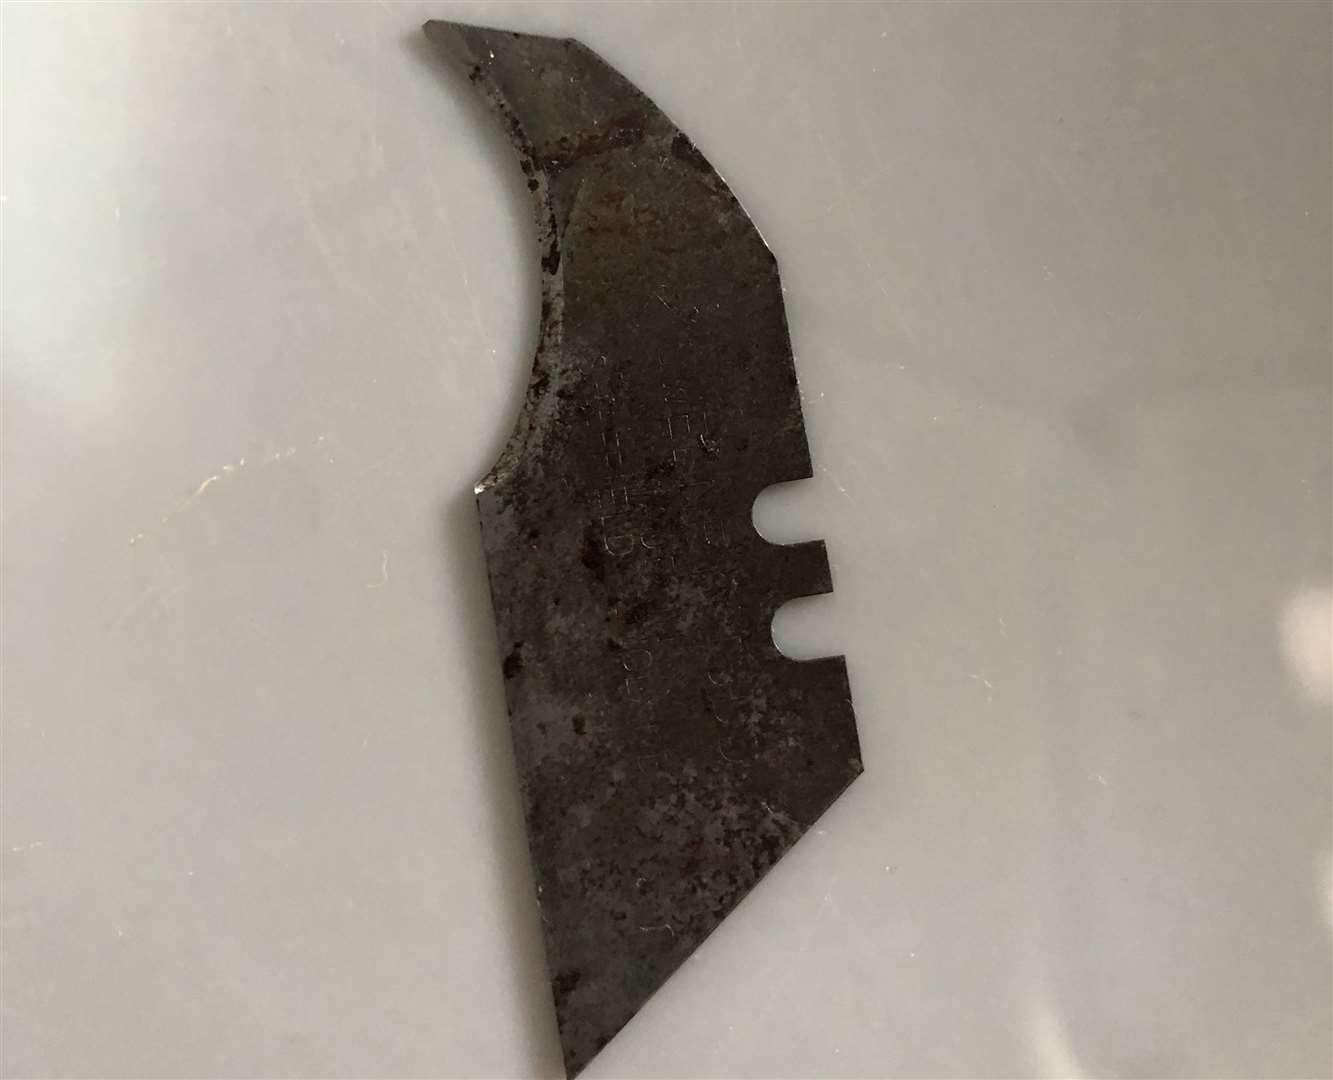 Stanley blade found in Freddie's bag. Picture: Aimee Collison